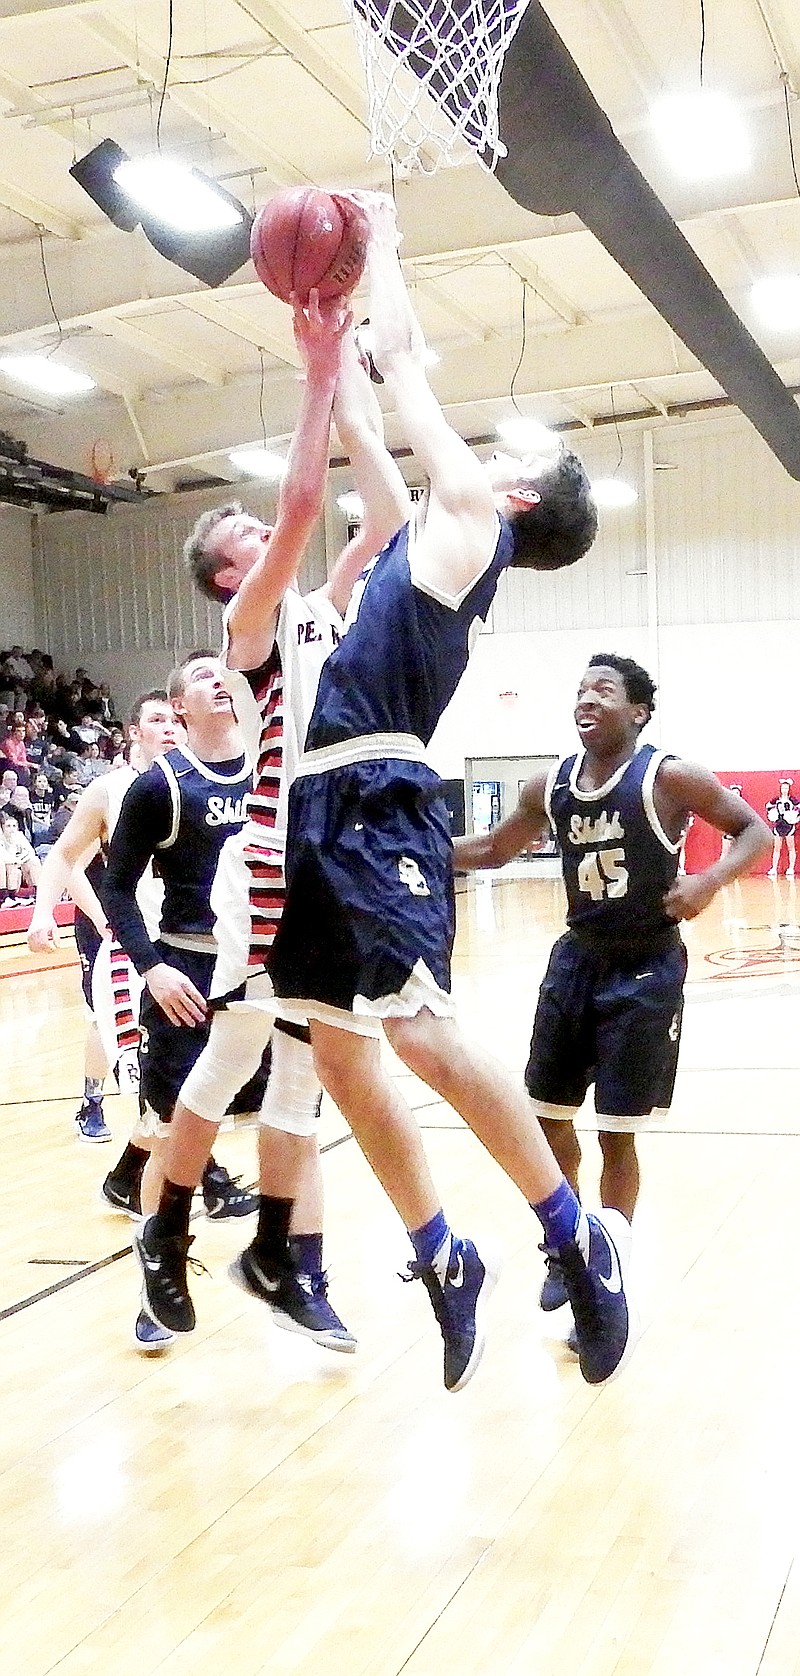 TIMES photograph by Annette Beard Blackhawk junior Joey Hall (No. 44) went up for a shot as Shiloh sophomore Gregory Bryant (No. 31) tried to block the goal Friday night, Feb. 12, in Blackhawk Gym.